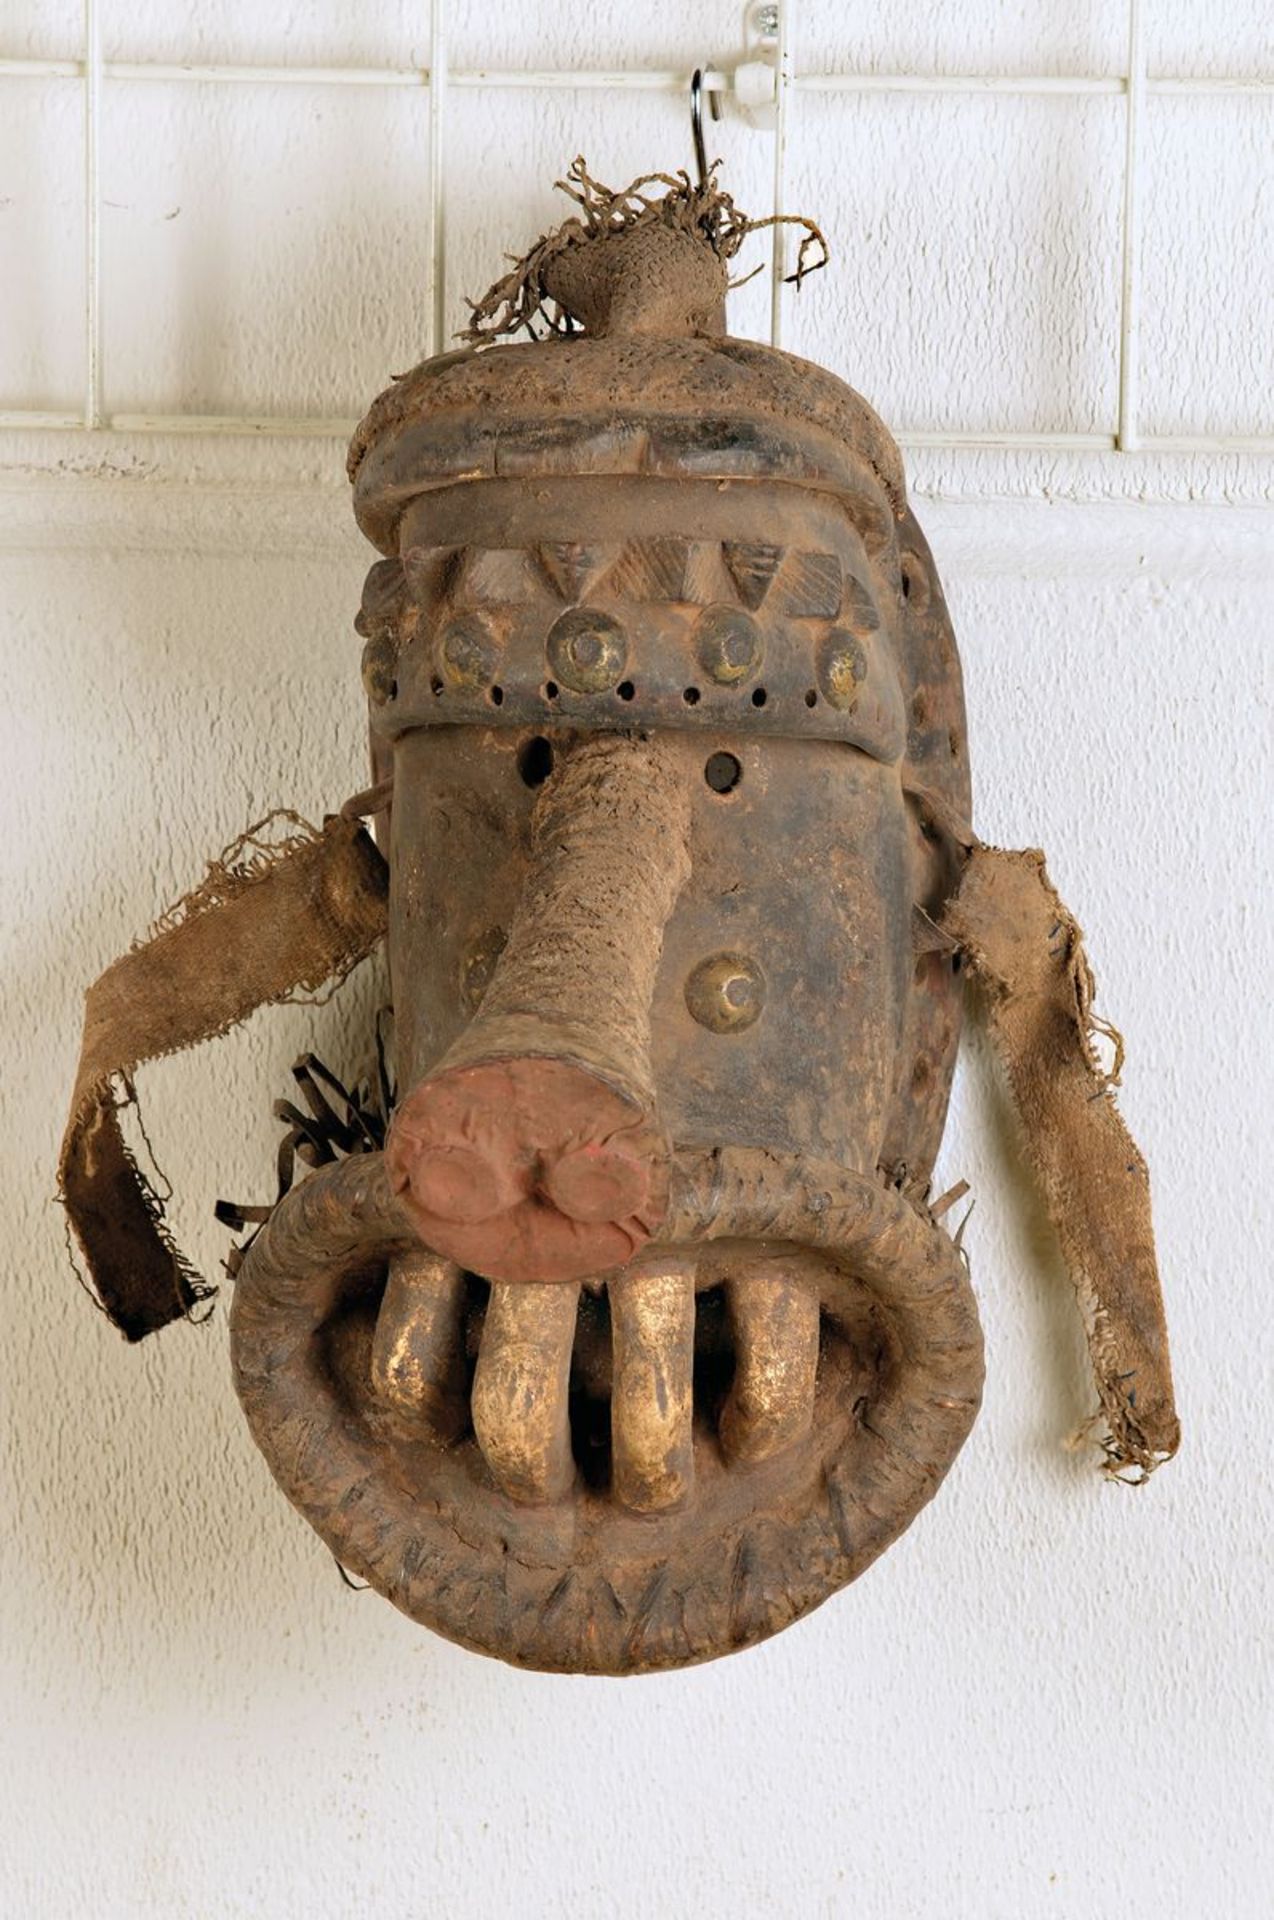 fertility Mask, Ivory Coast, approx. 60 years old, wood, massive mouth and teeth, symbols for